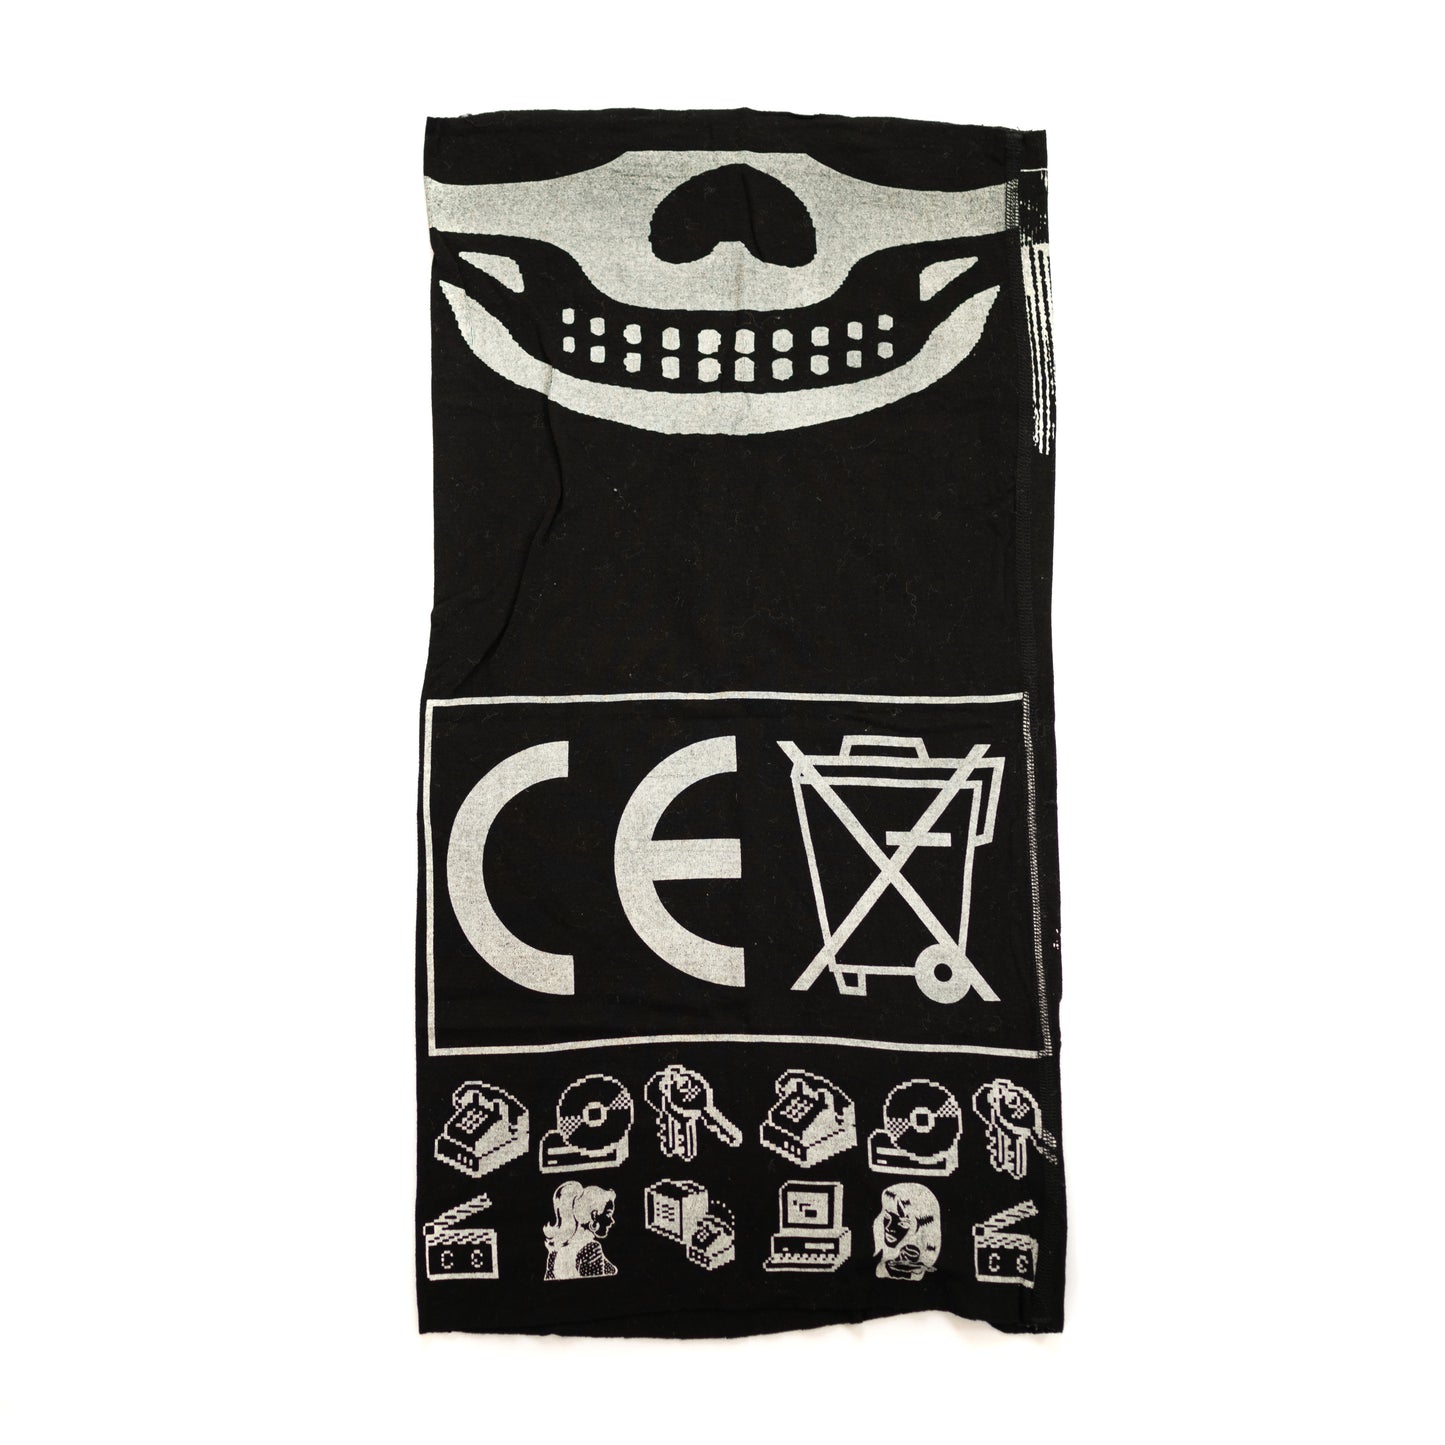 Cav Empt Disguise Mask #1 (2014FW)